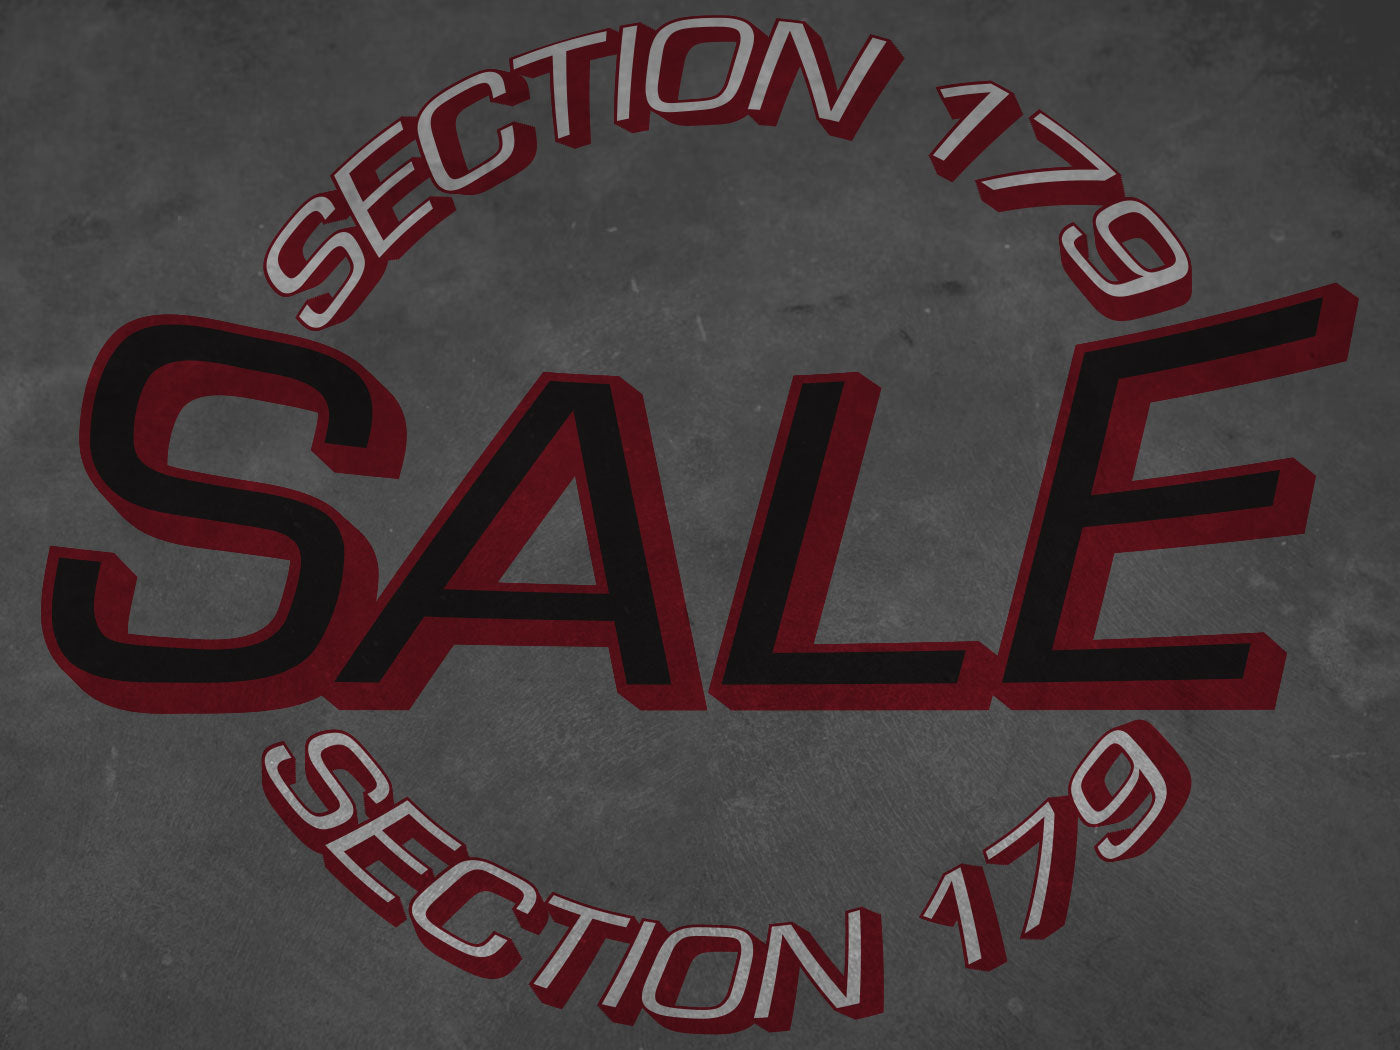 Section 179 Sale: Savings on Detailing Equipment ALL of December.